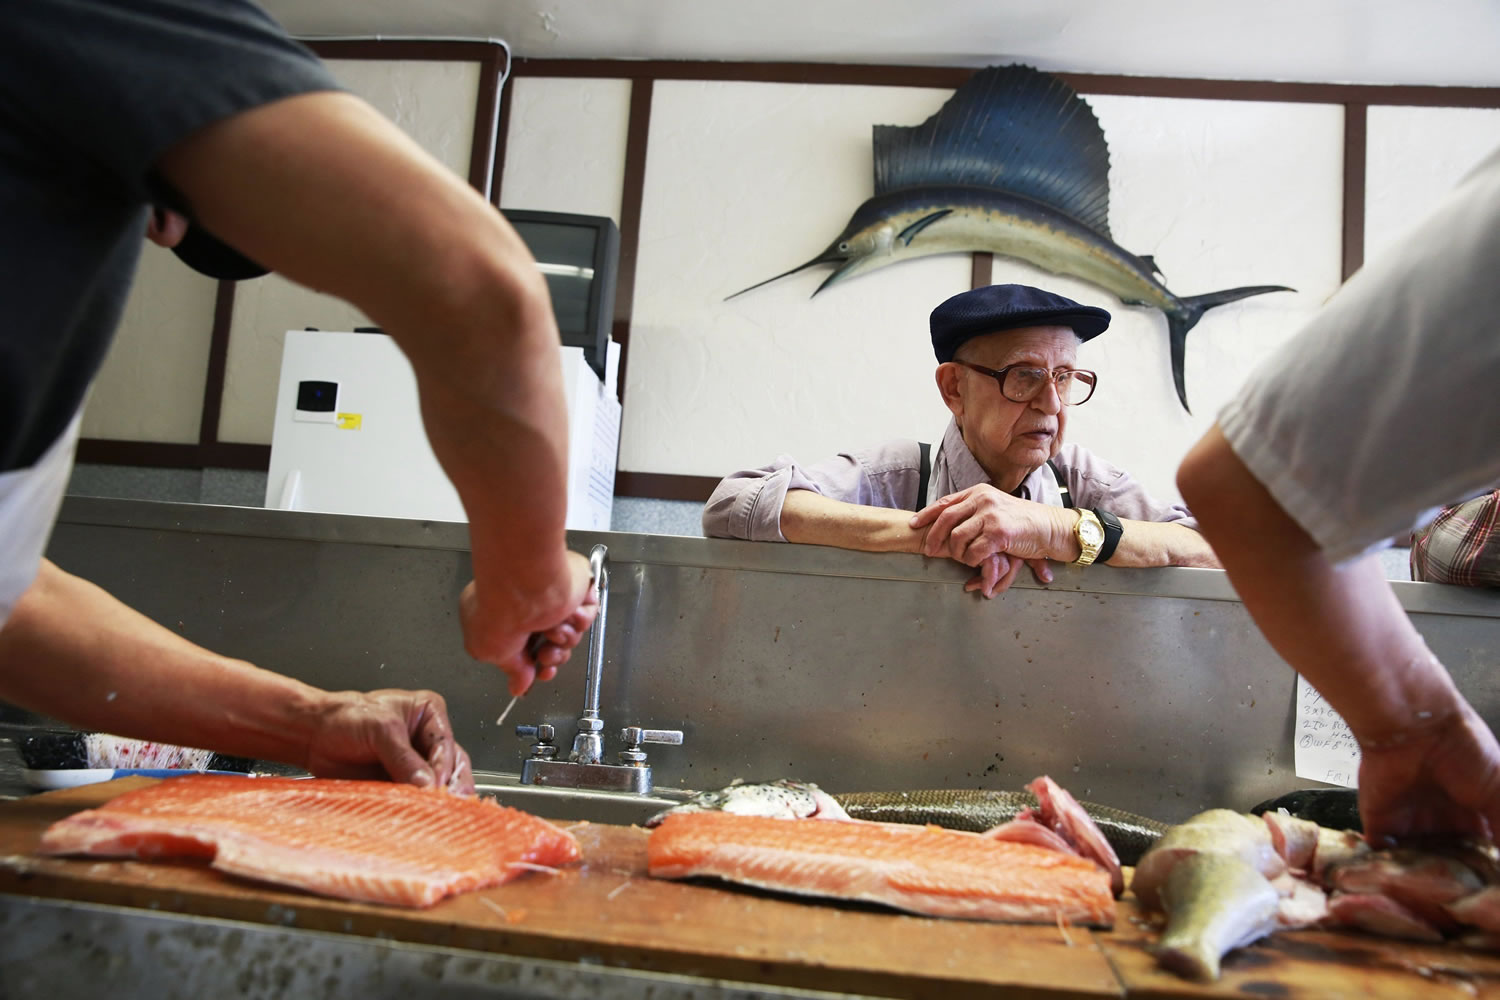 Robert's Fish Market worker Robert Schuffler, 97, watches Luis Fernandez, 58, left, and owner Arturo Venegas, 44, prepare fish at the fish market on West Devon Avenue in Chicago on Friday, April 11, 2014. Chicago-area fish suppliers are dealing with panicked cooks after a shortage of whitefish has left many scrambling to prepare the traditional, if  sometimes dreaded, gefilte fish for Passover, which begins Monday evening.